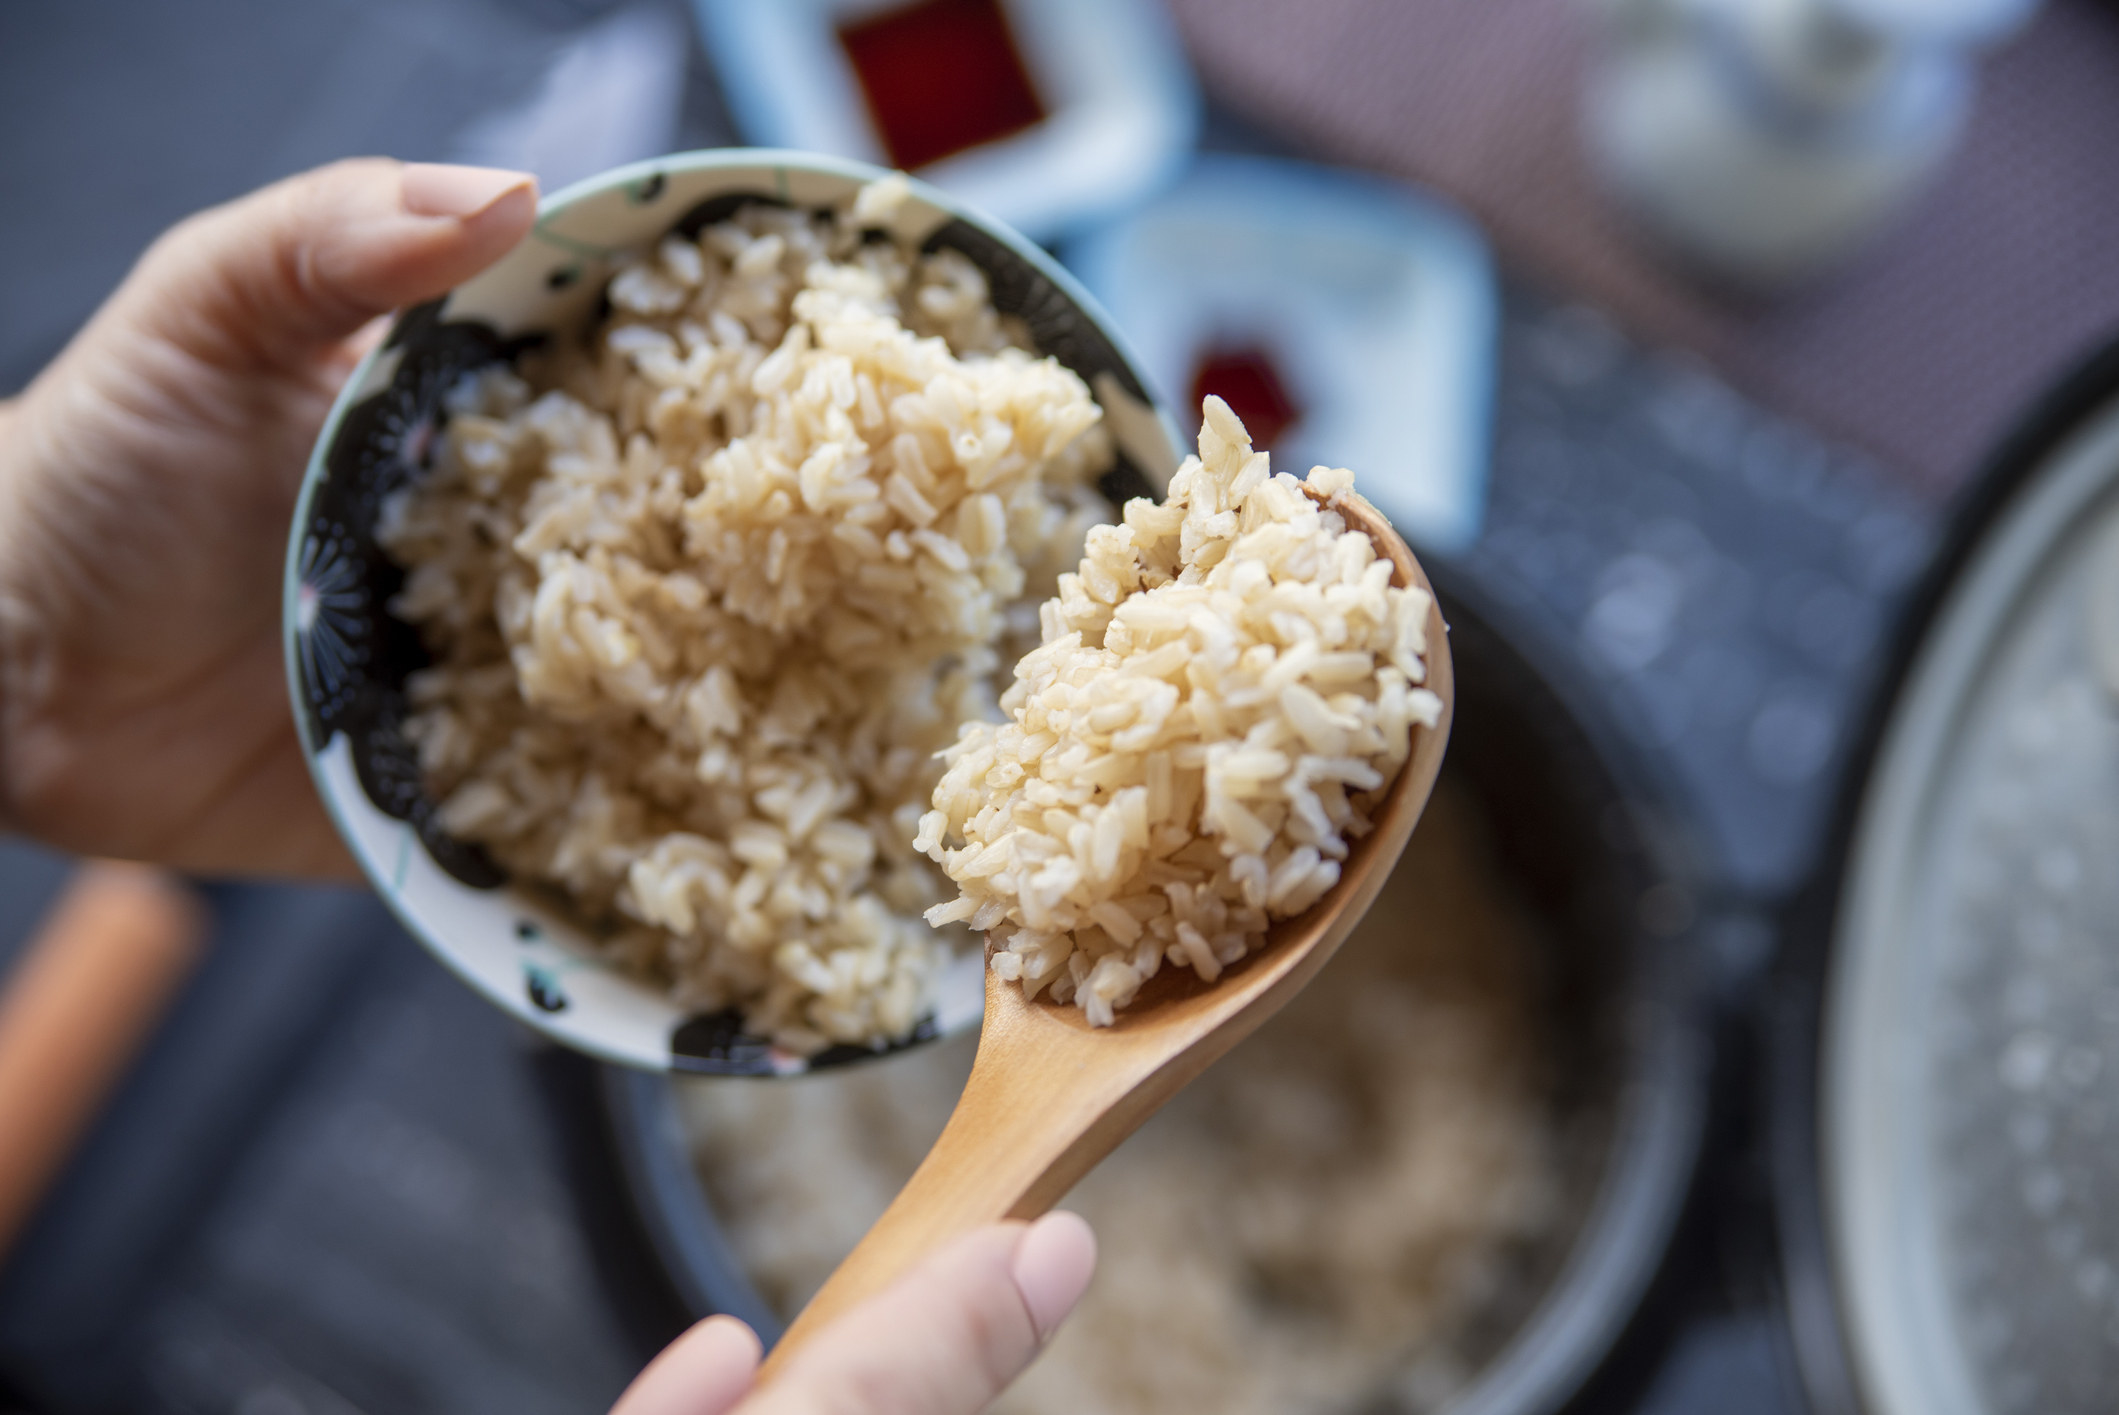 Spooning rice into a bowl.